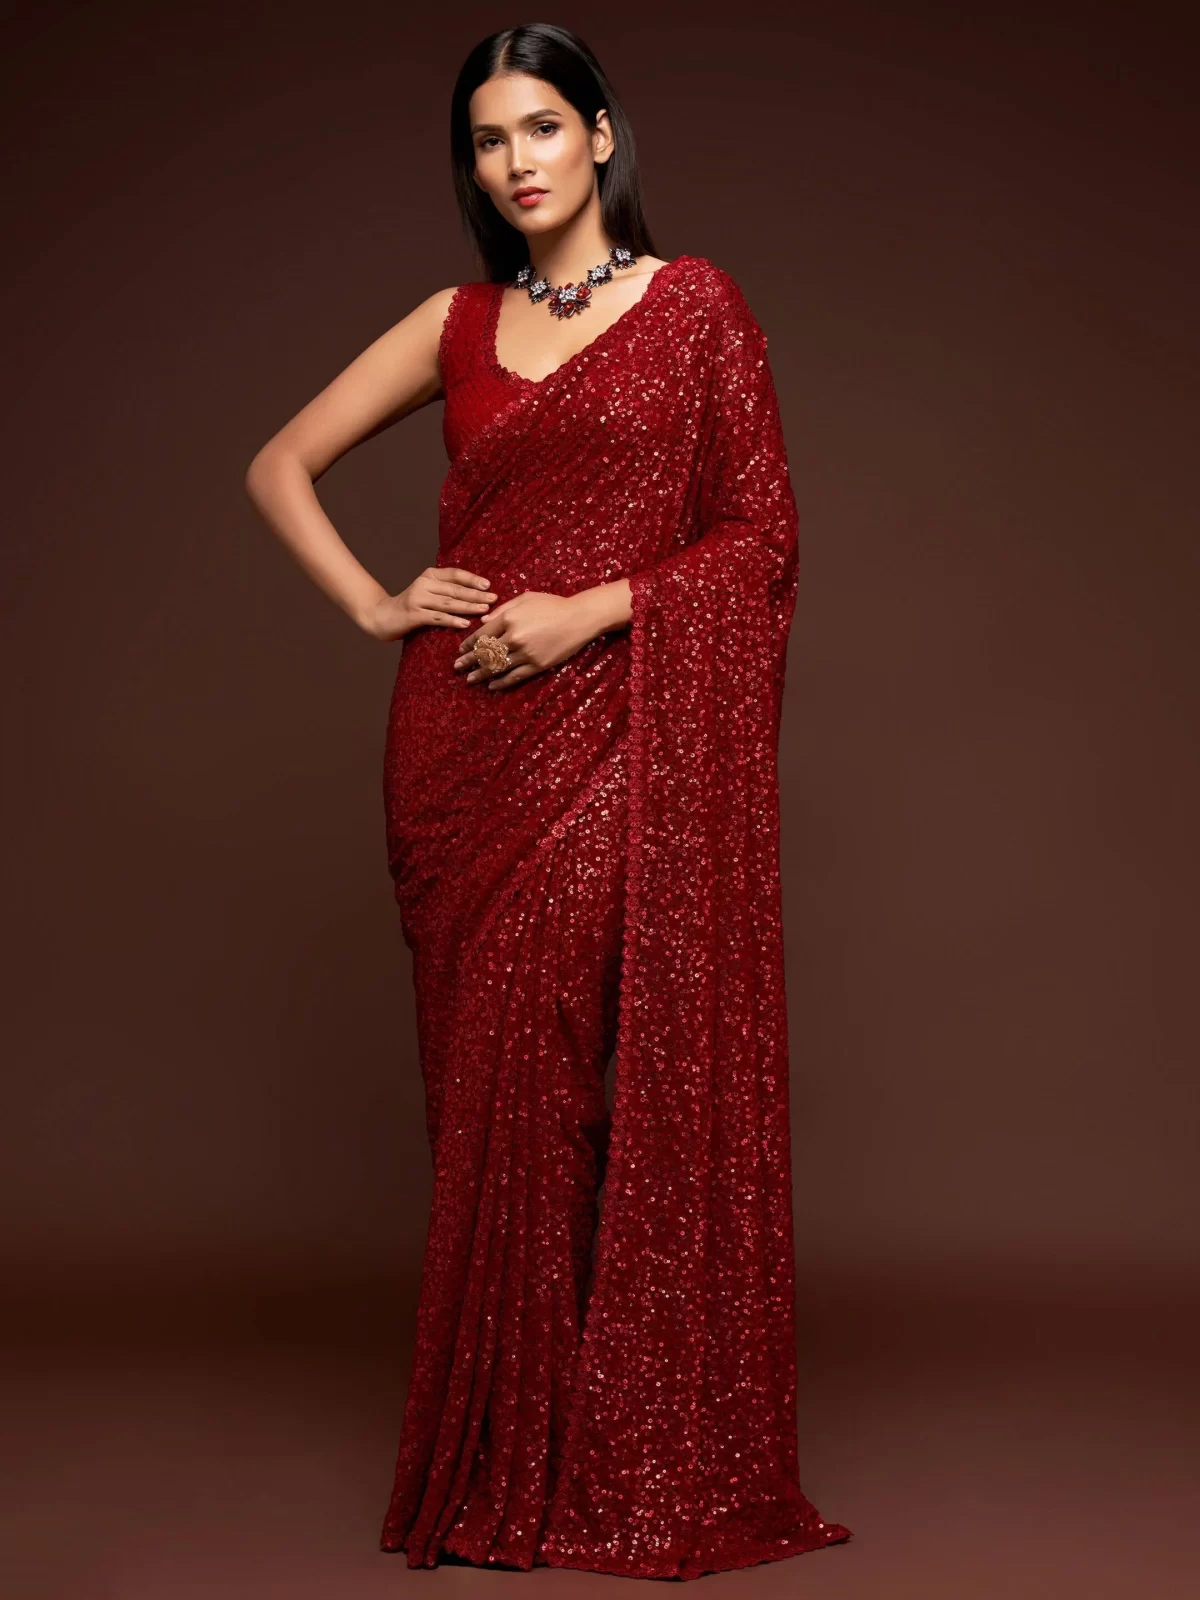 The Timeless Elegance of Sequence Sarees